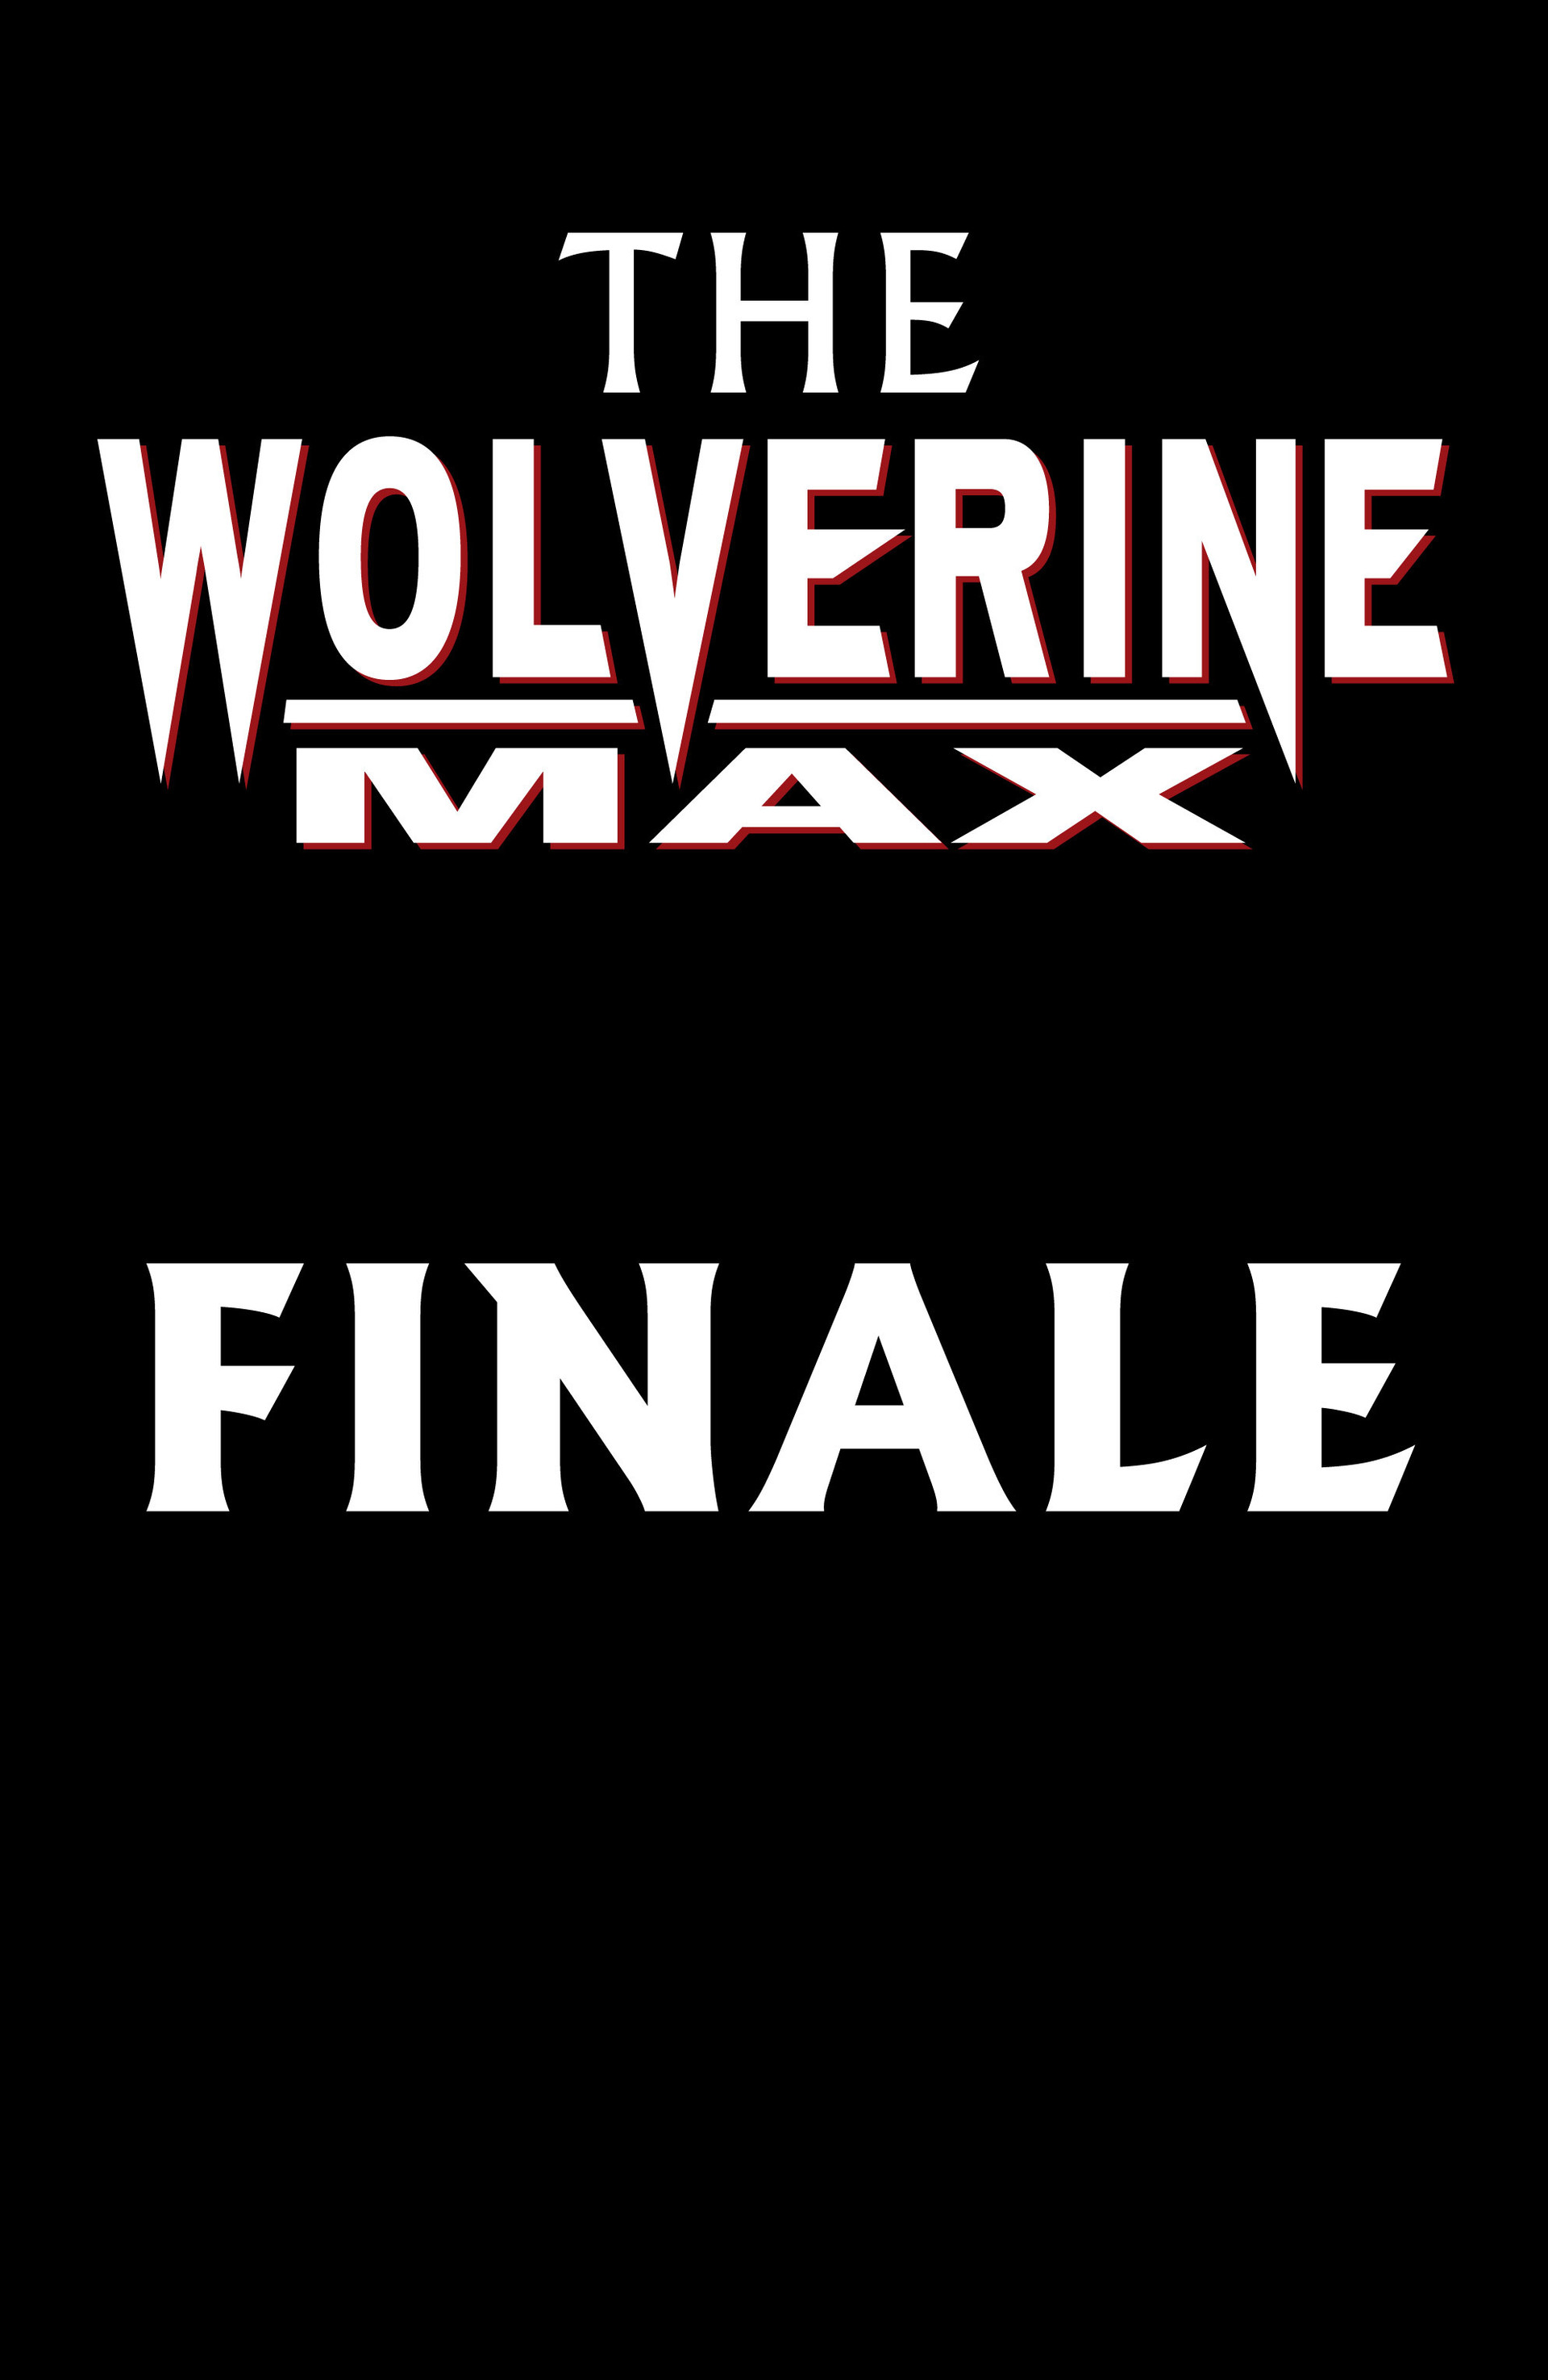 Read online Wolverine MAX comic -  Issue #14 - 23